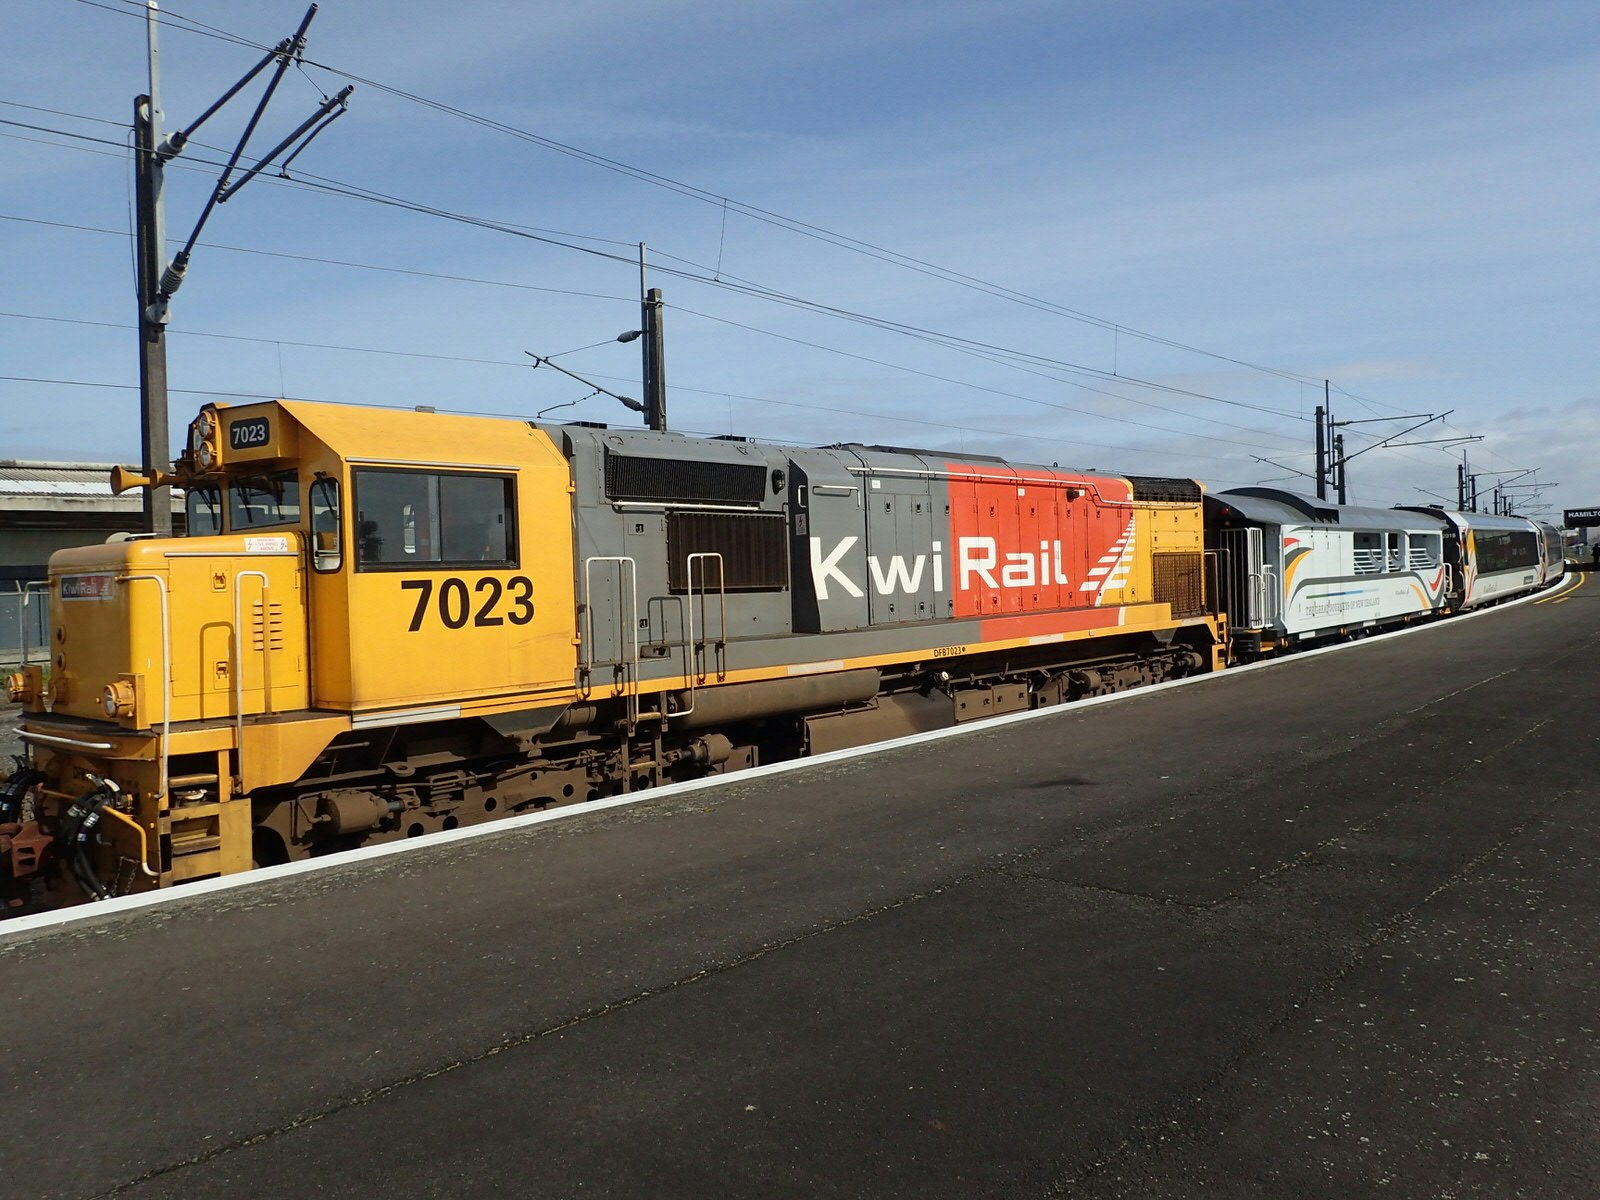 The yellow, black and red Northern Explorer train at Hamilton station, New Zealand.